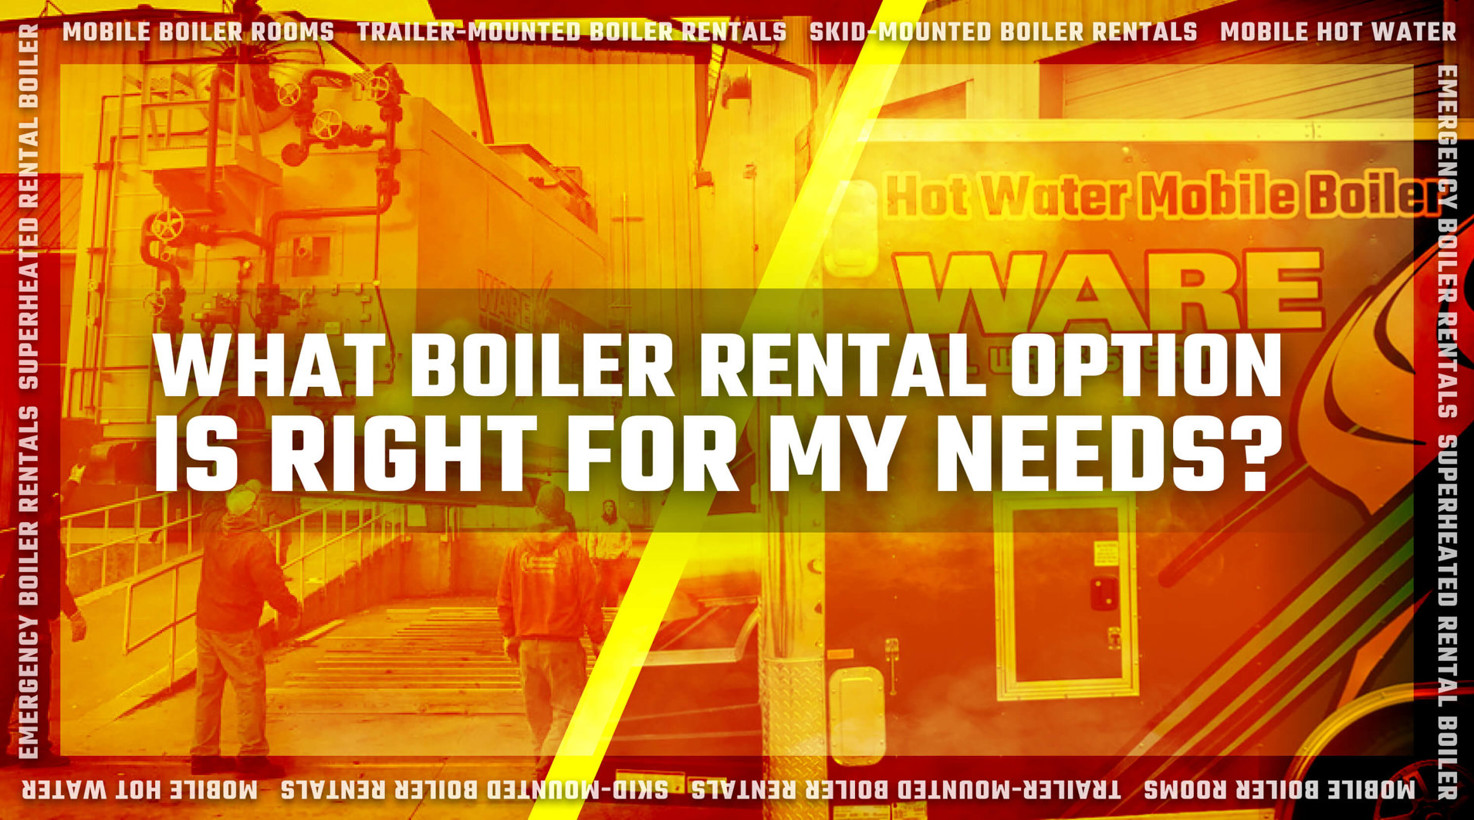 What Boiler Rental Option is Right for My Needs?